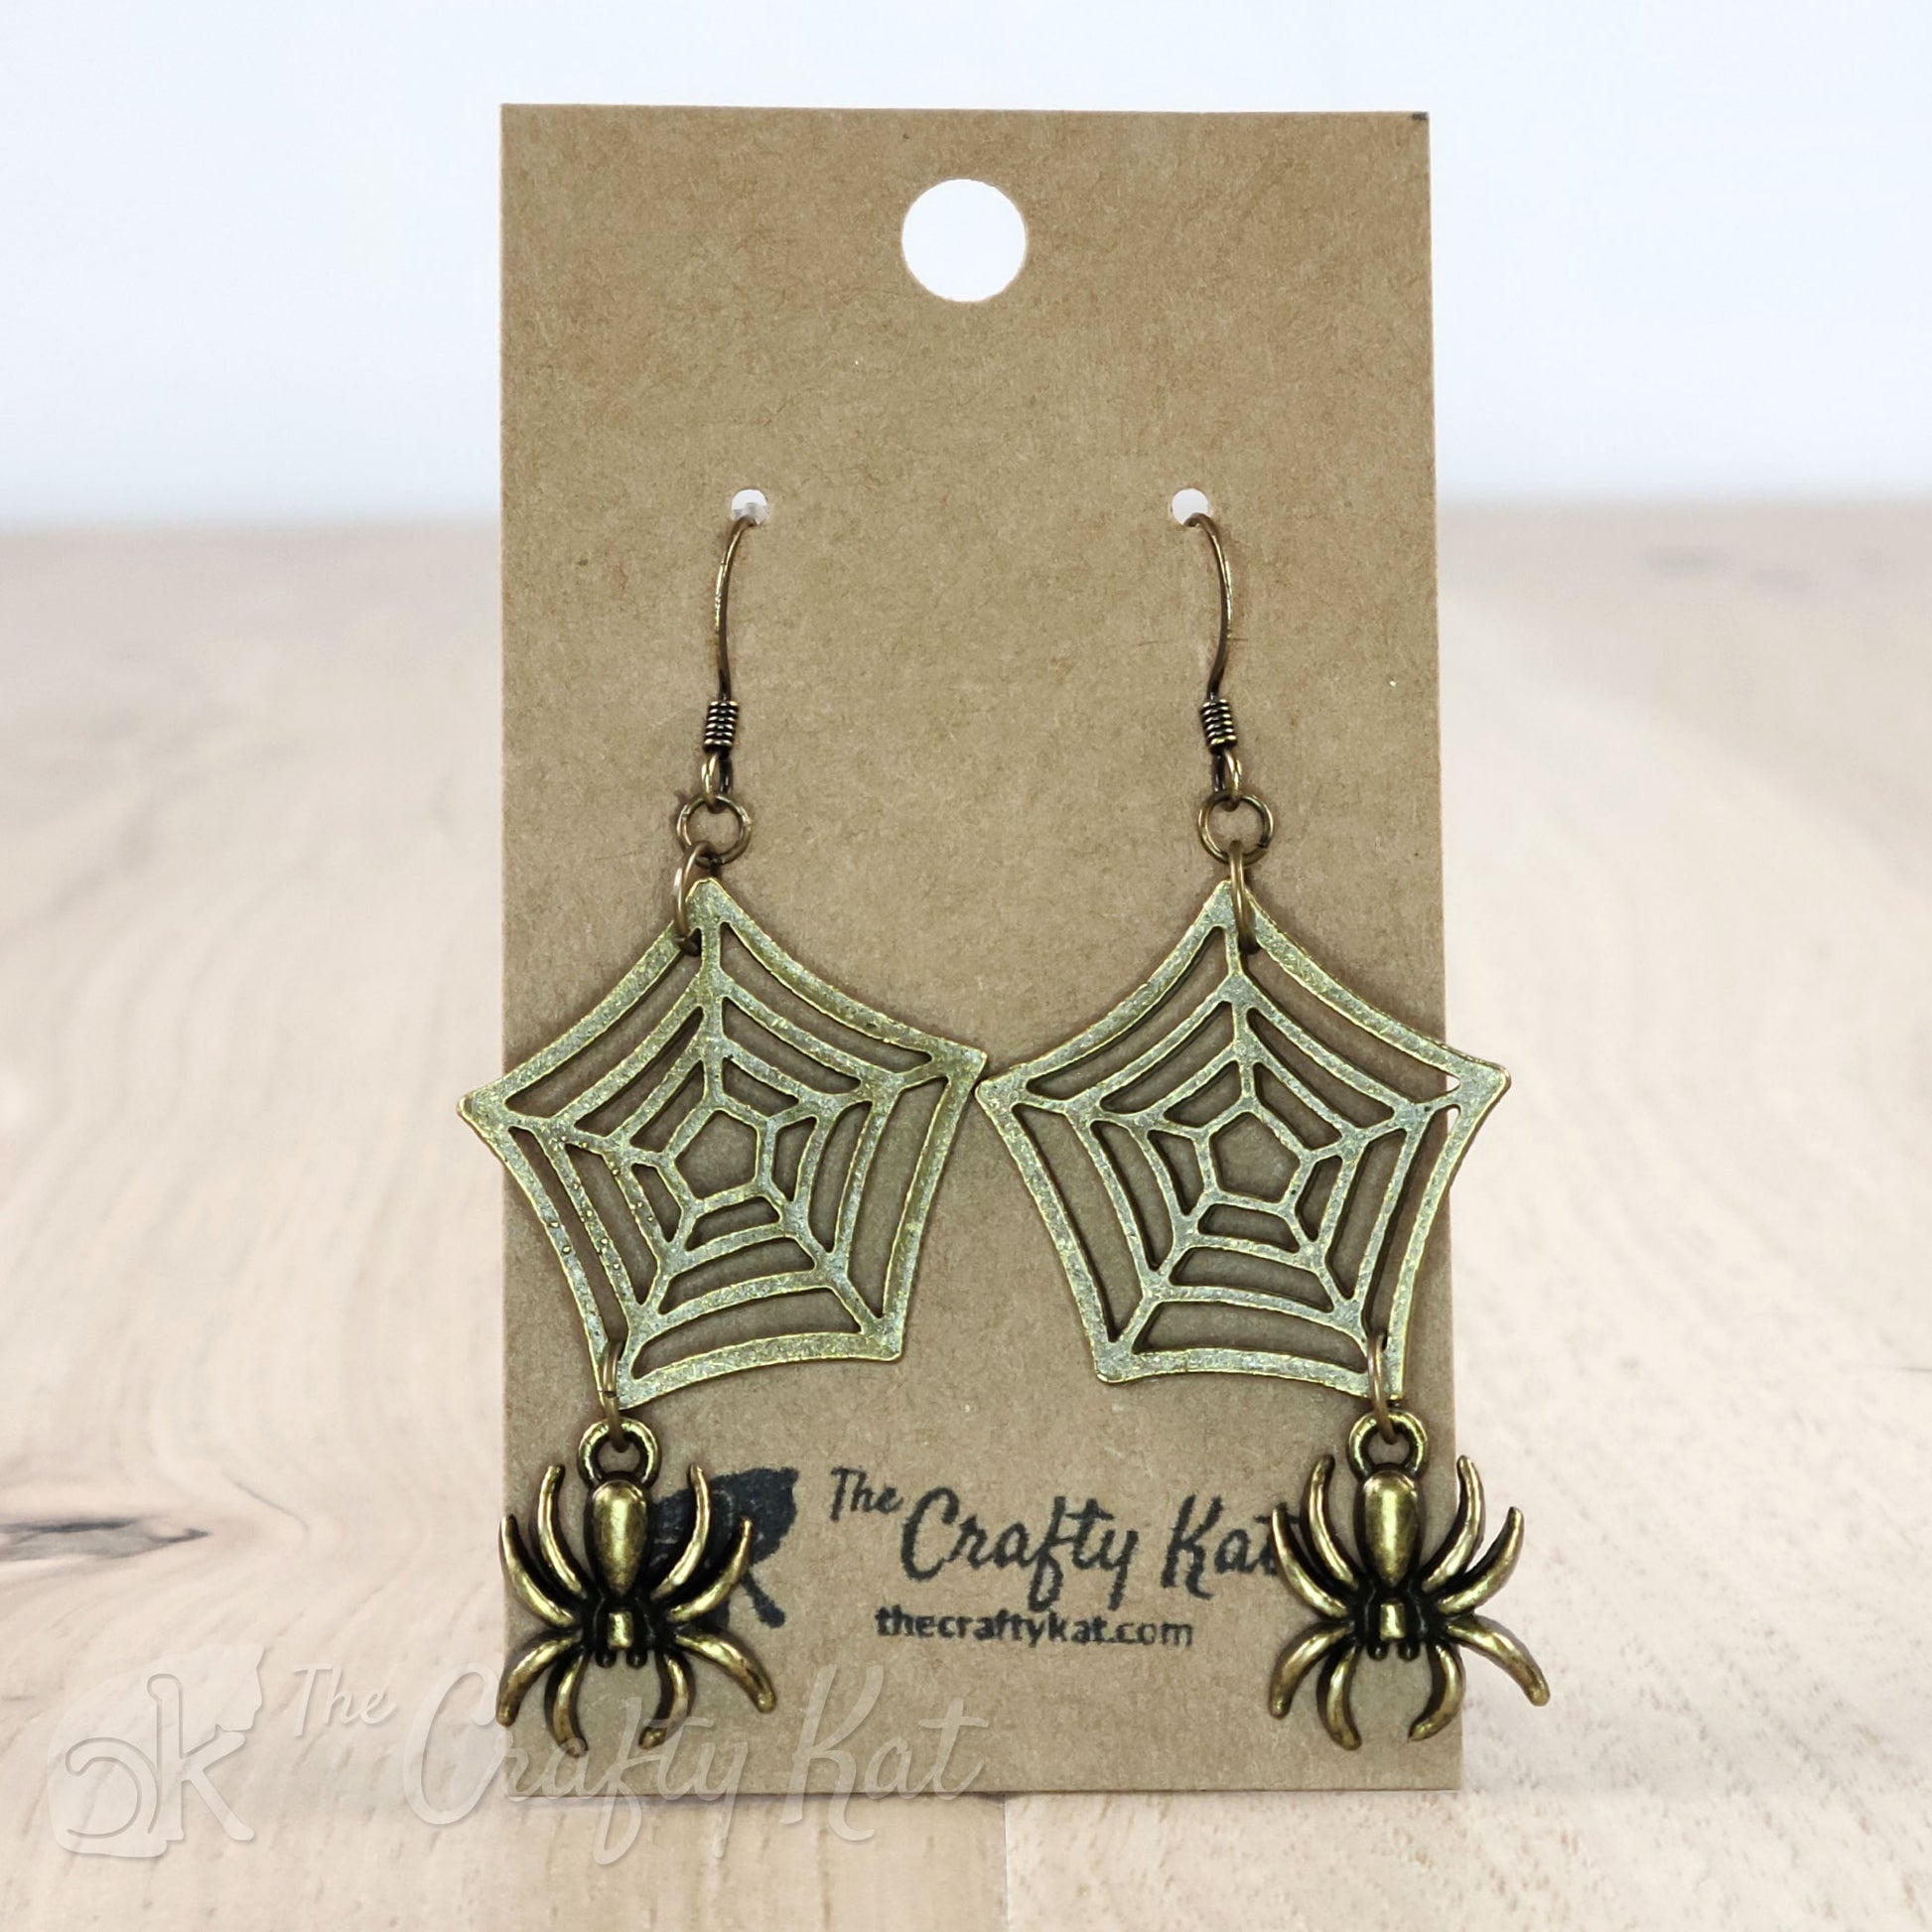 Drop earrings made of bronze webs and spiders.